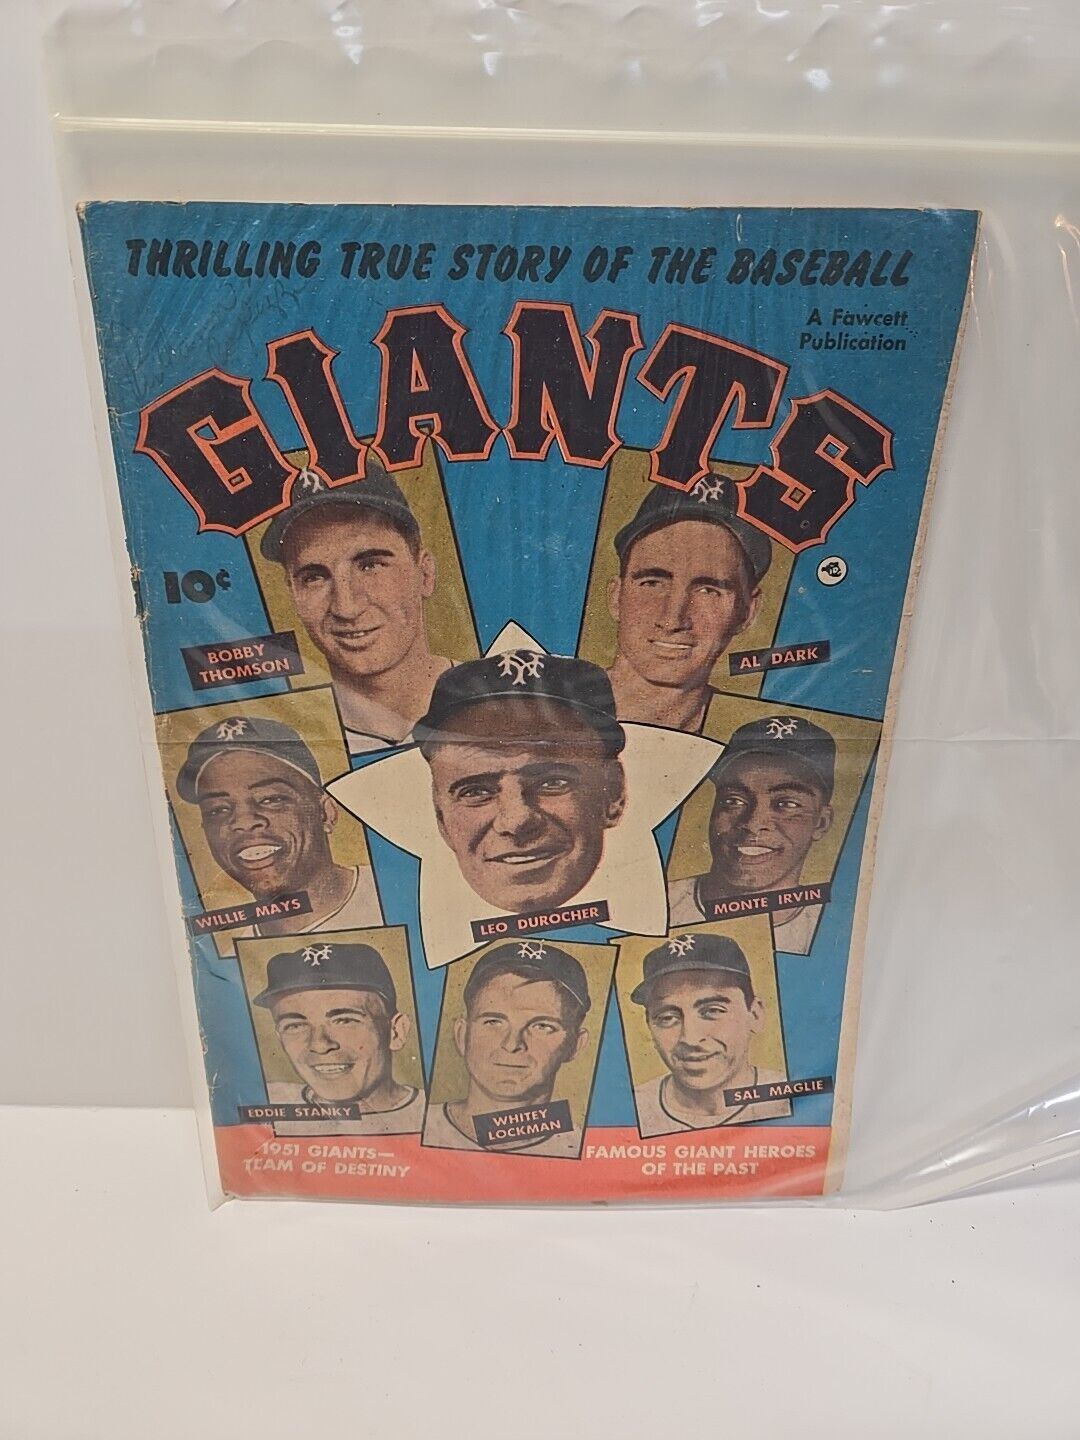 1952 Thrilling True Story of the Baseball Giants 1951 With Willie Mays